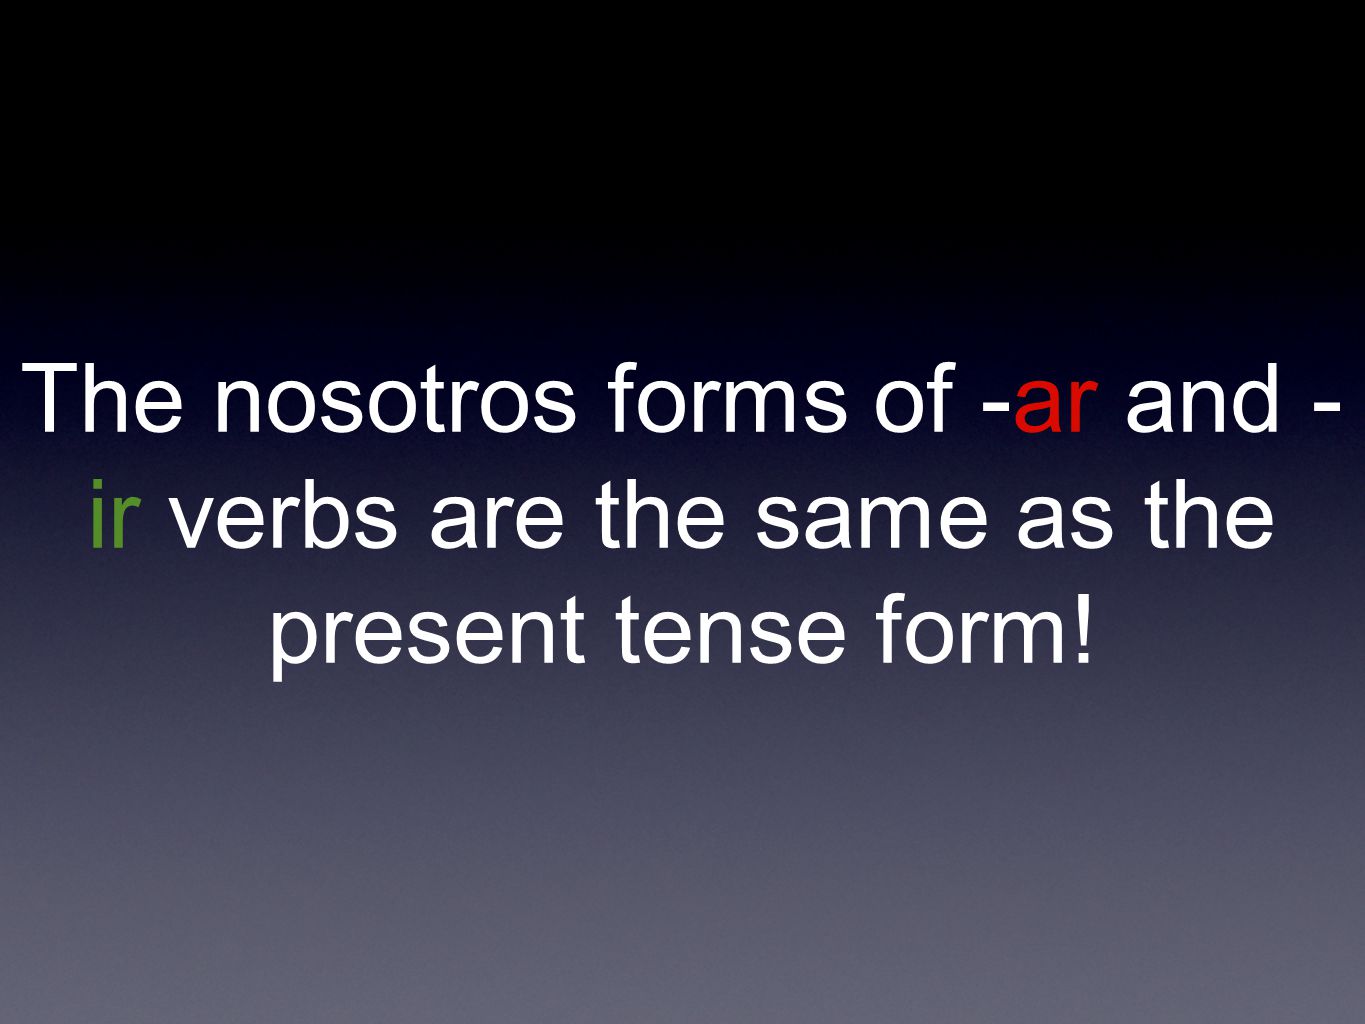 The nosotros forms of -ar and - ir verbs are the same as the present tense form!